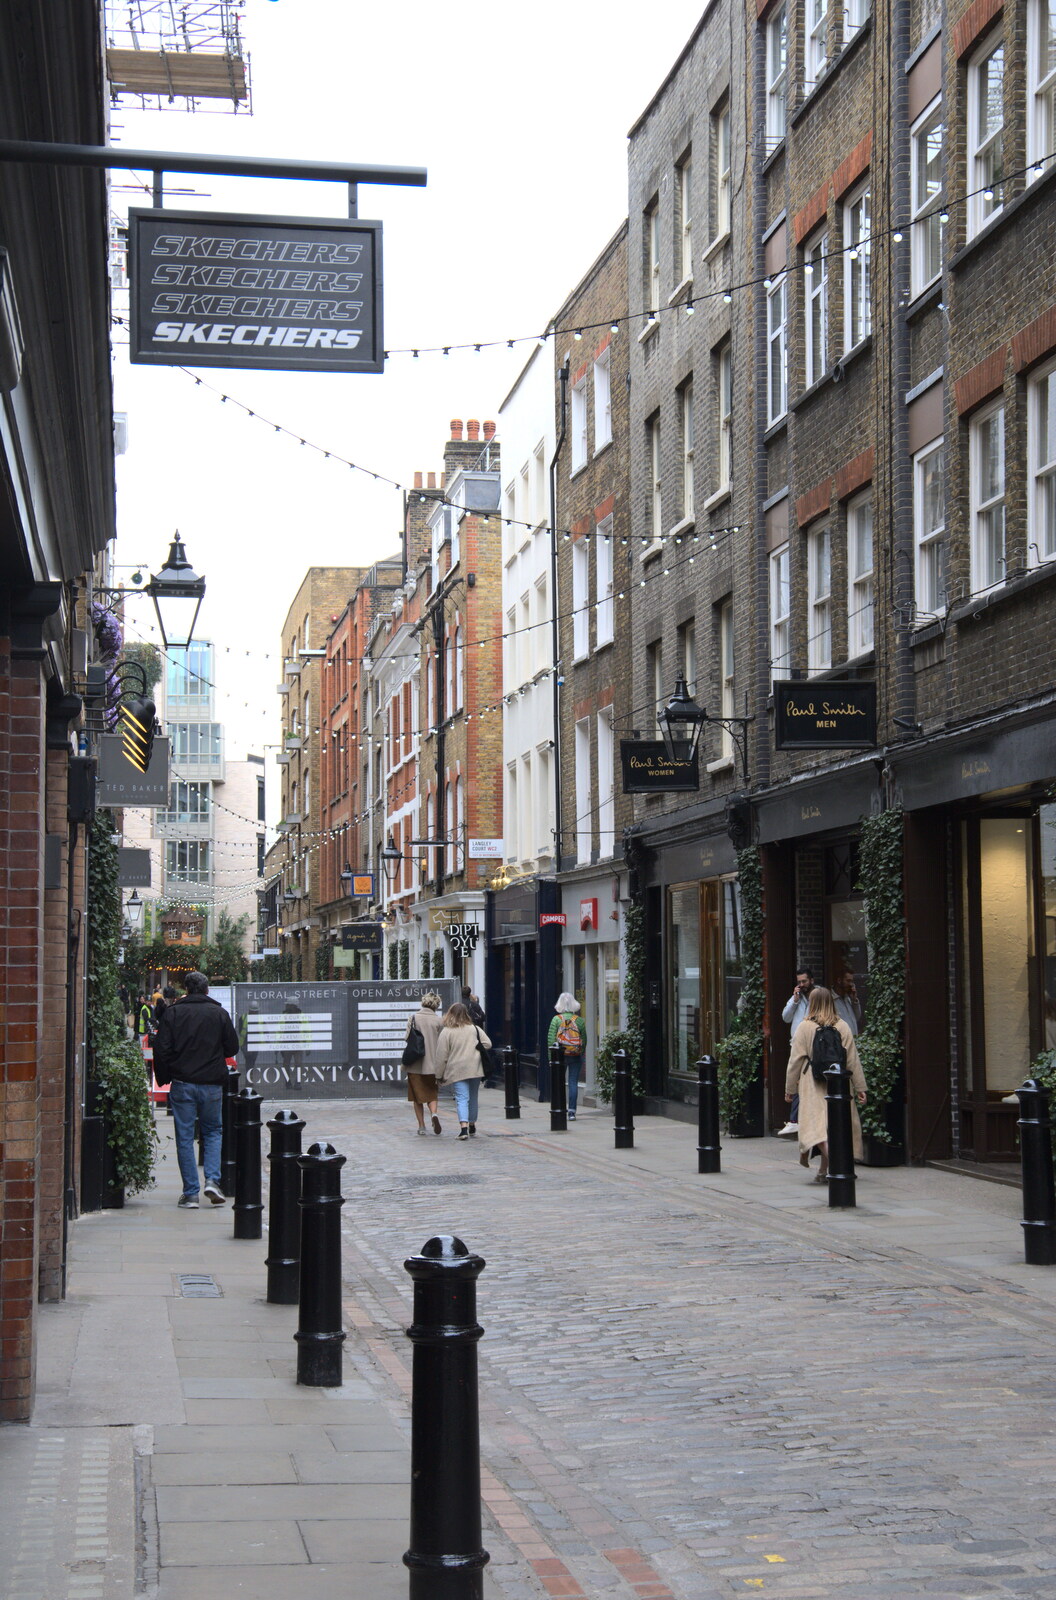 A side street near Covent Garden tube station from A SwiftKey Memorial Service, Covent Garden, London  - 13th March 2020